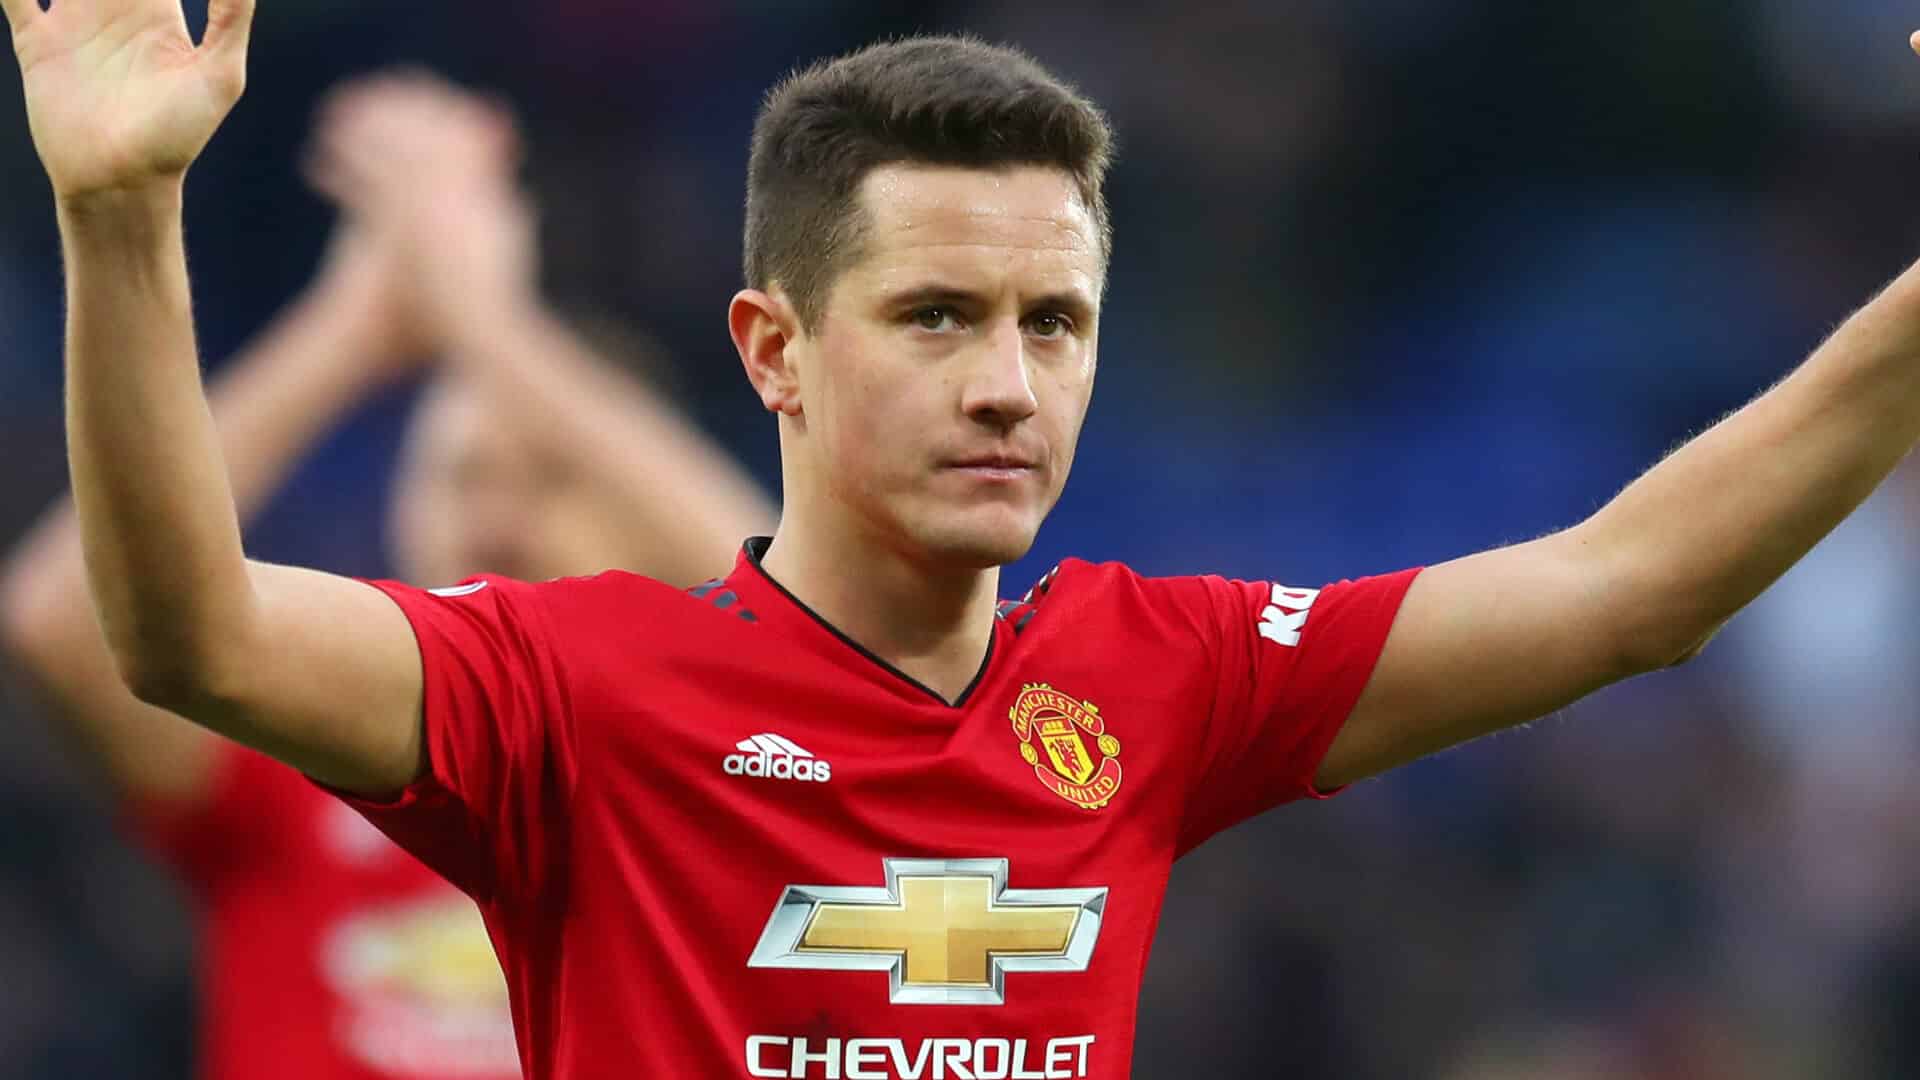 Ander Herrera Confirms Exit from Manchester United1920 x 1080